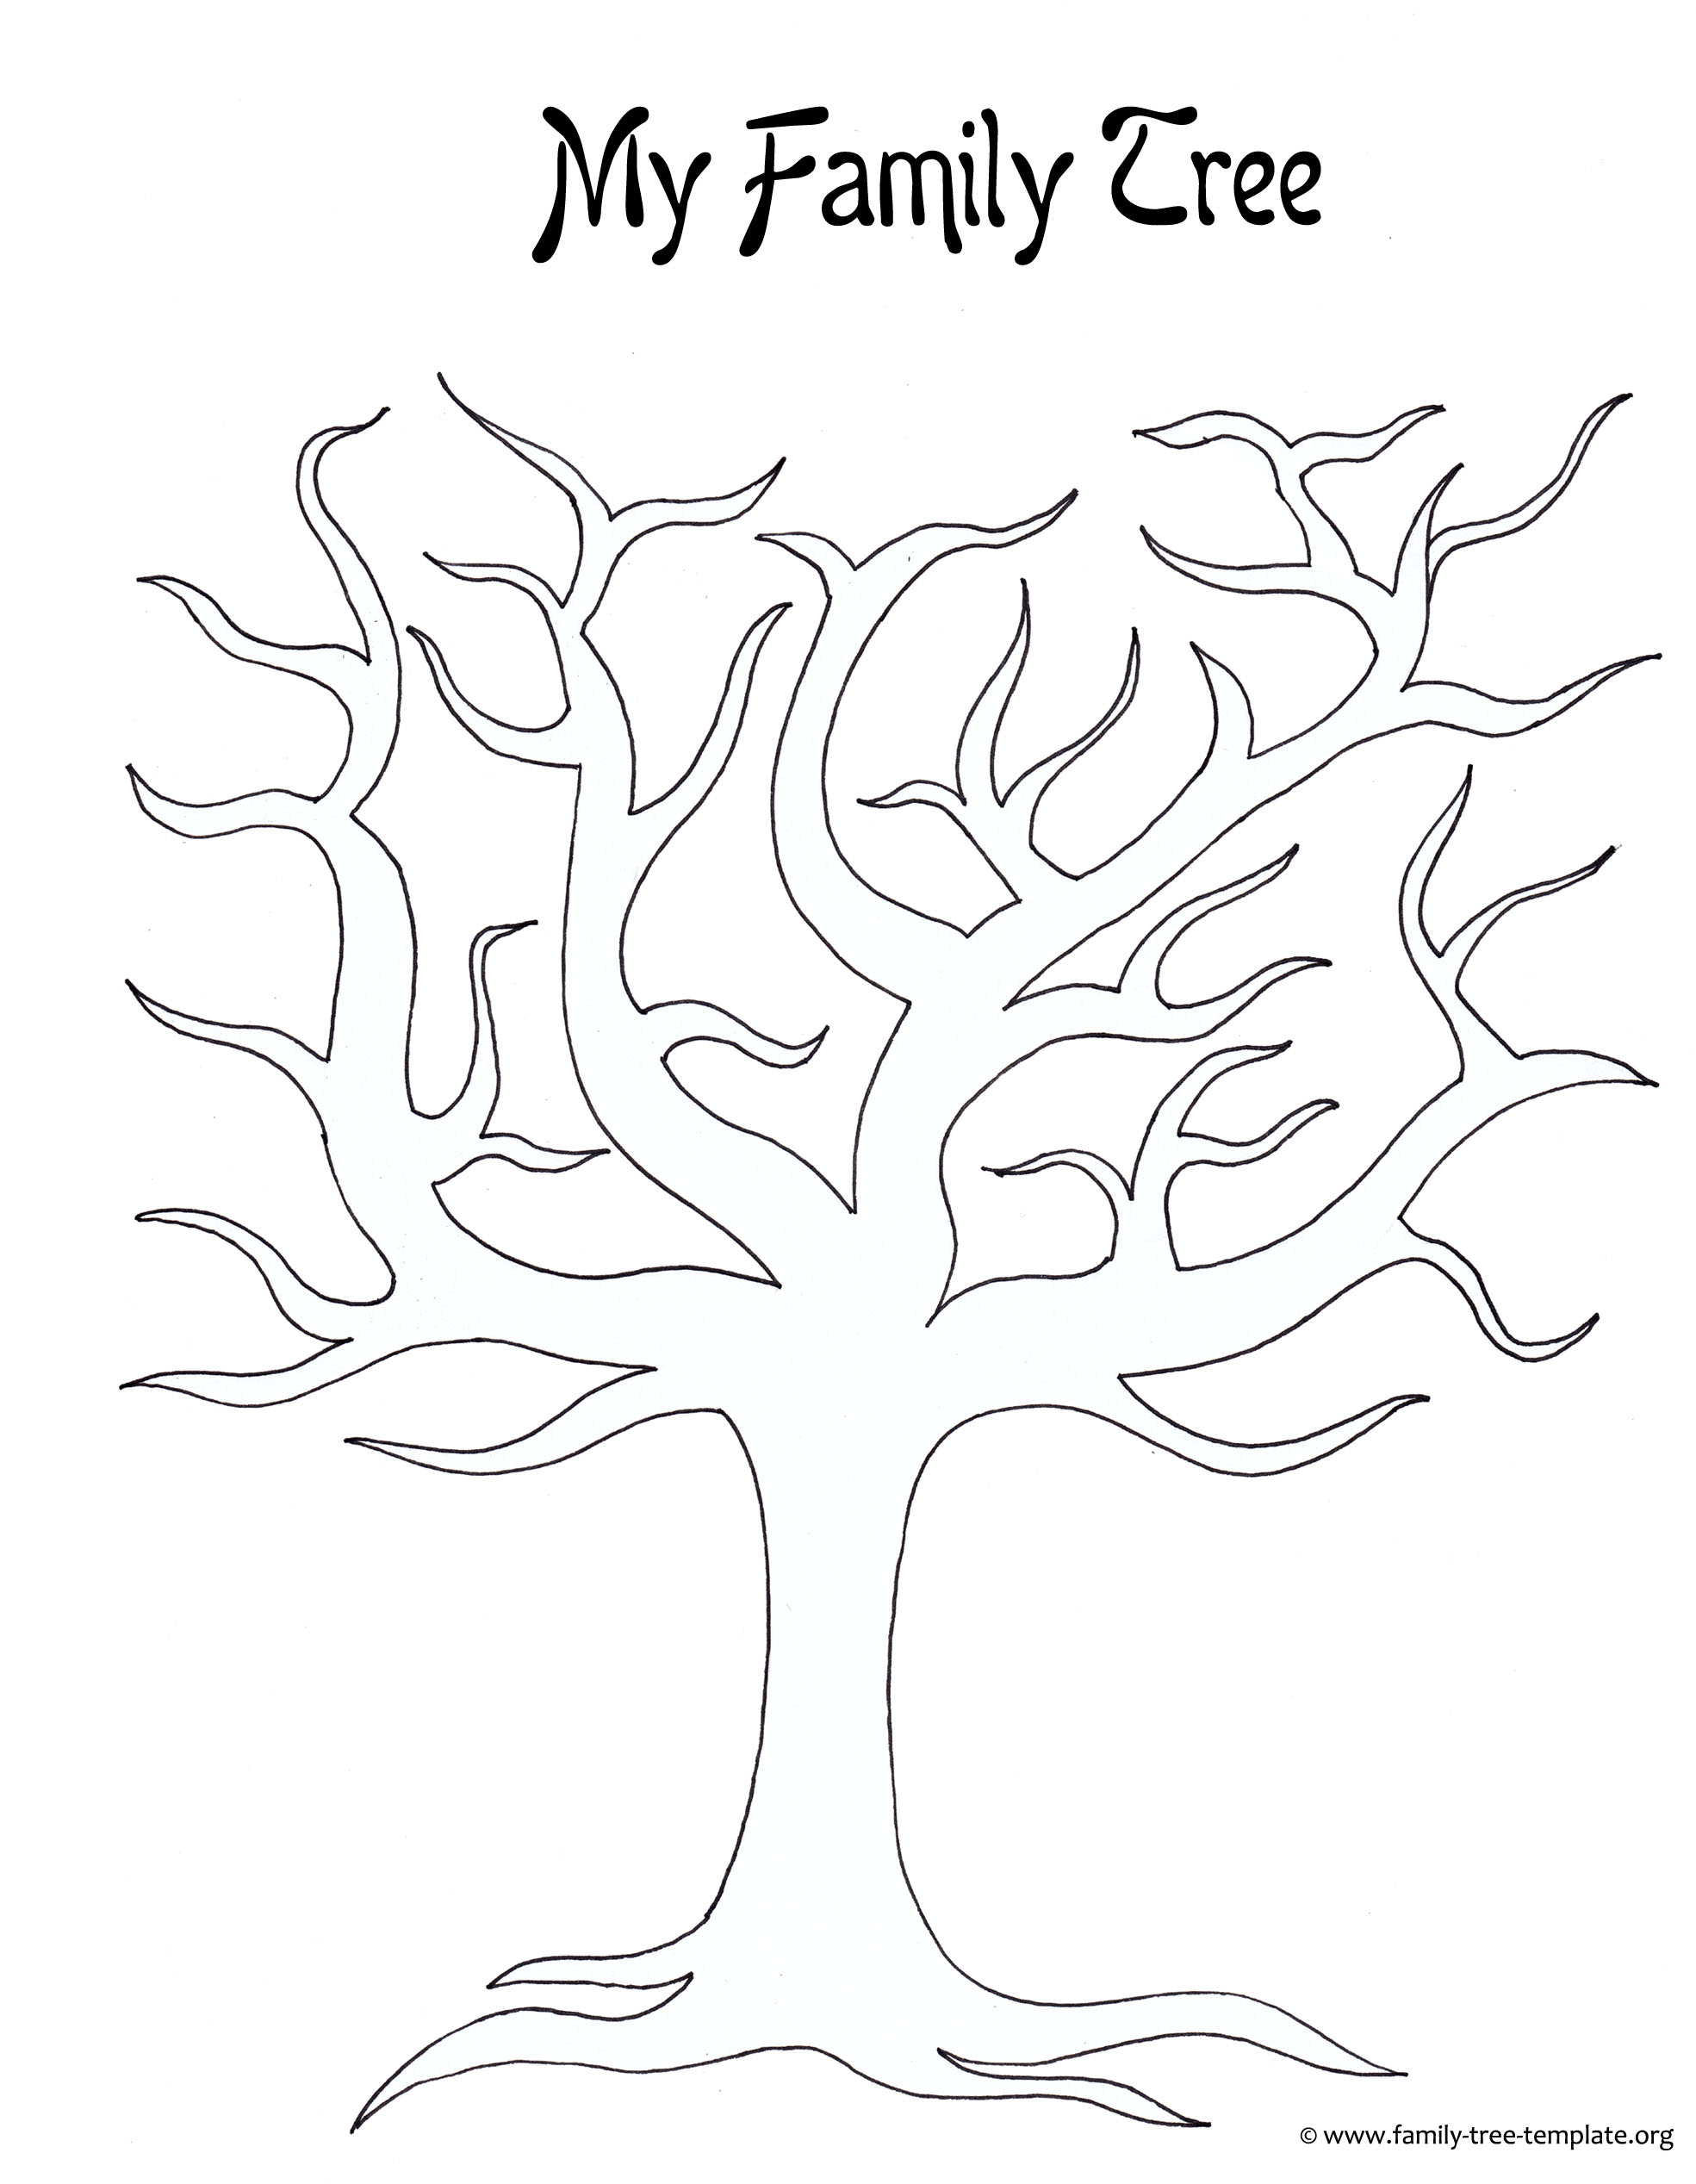 7-best-images-of-family-tree-outline-printable-printable-family-tree-template-generation